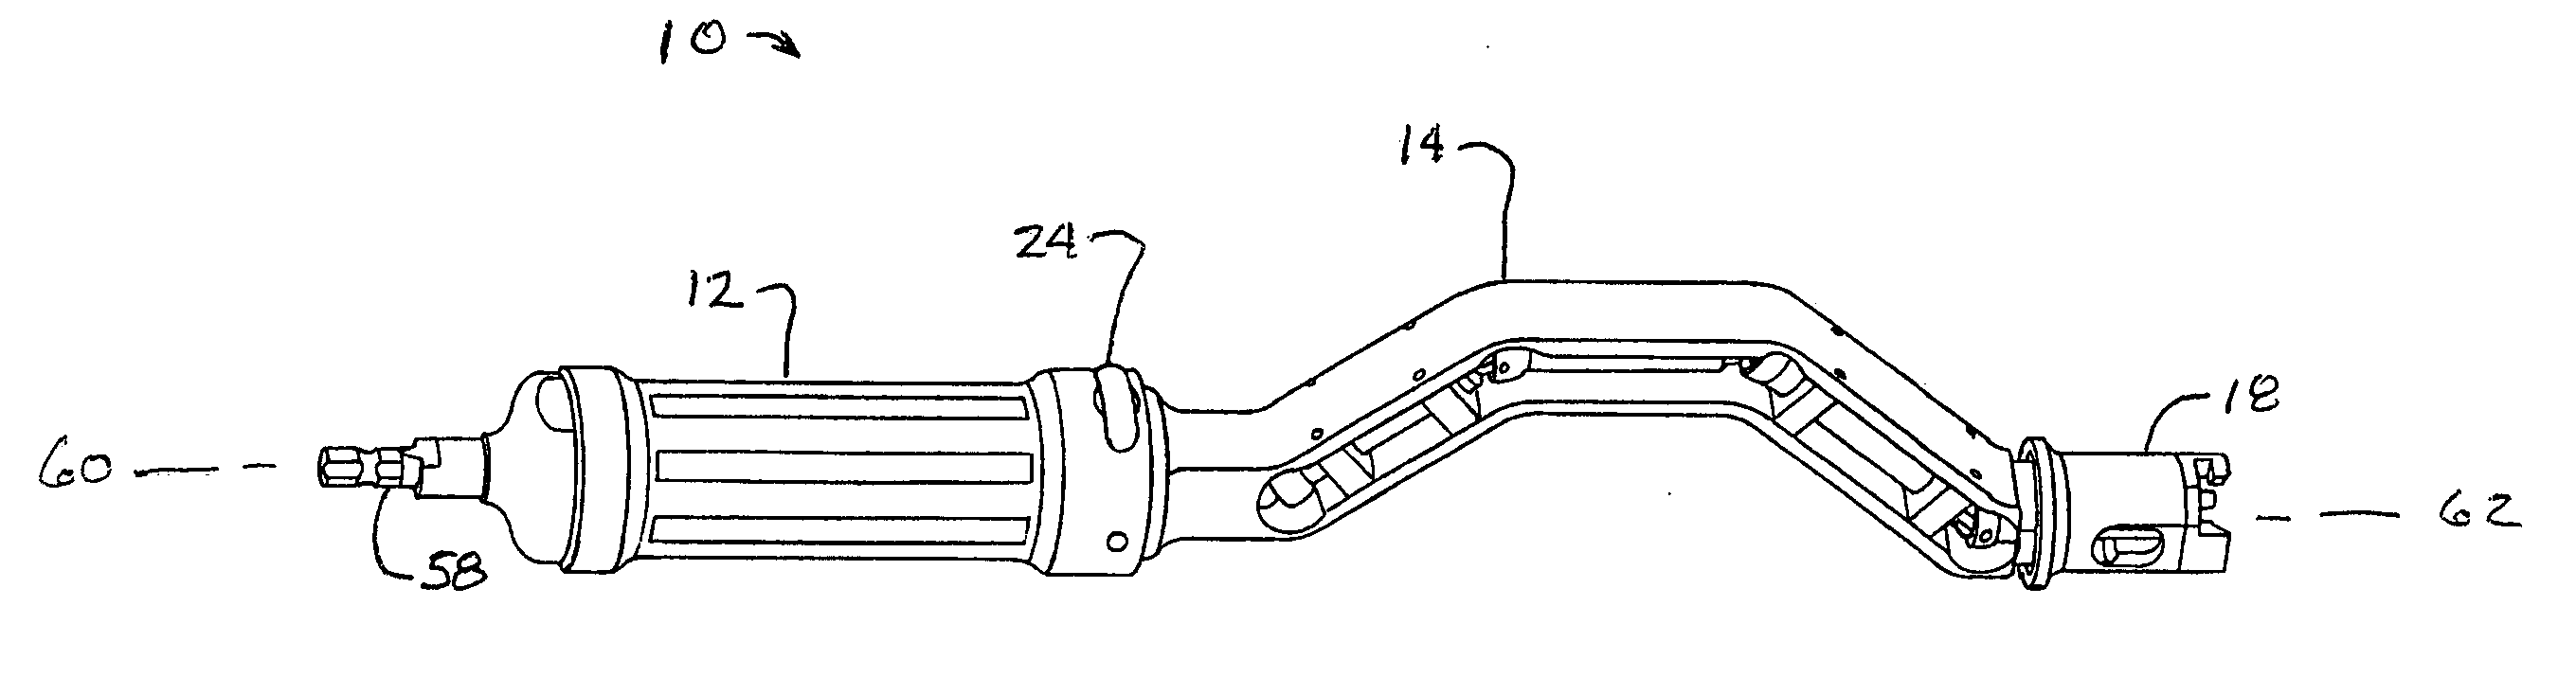 Minimally invasive surgical driver